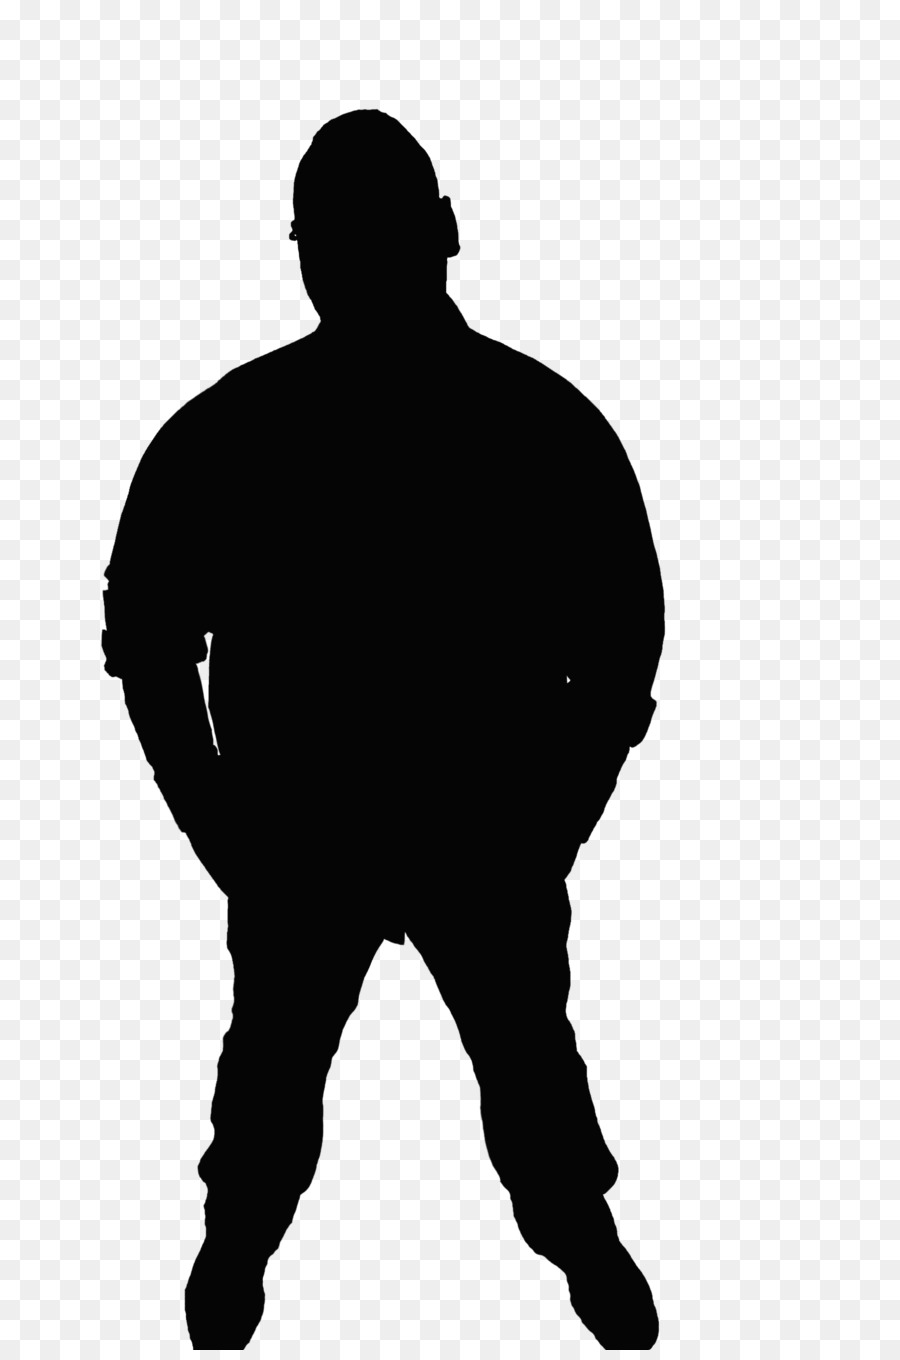 Silhouette Man Black - Silhouette png download - 3072*4608 - Free Transparent Silhouette png Download.